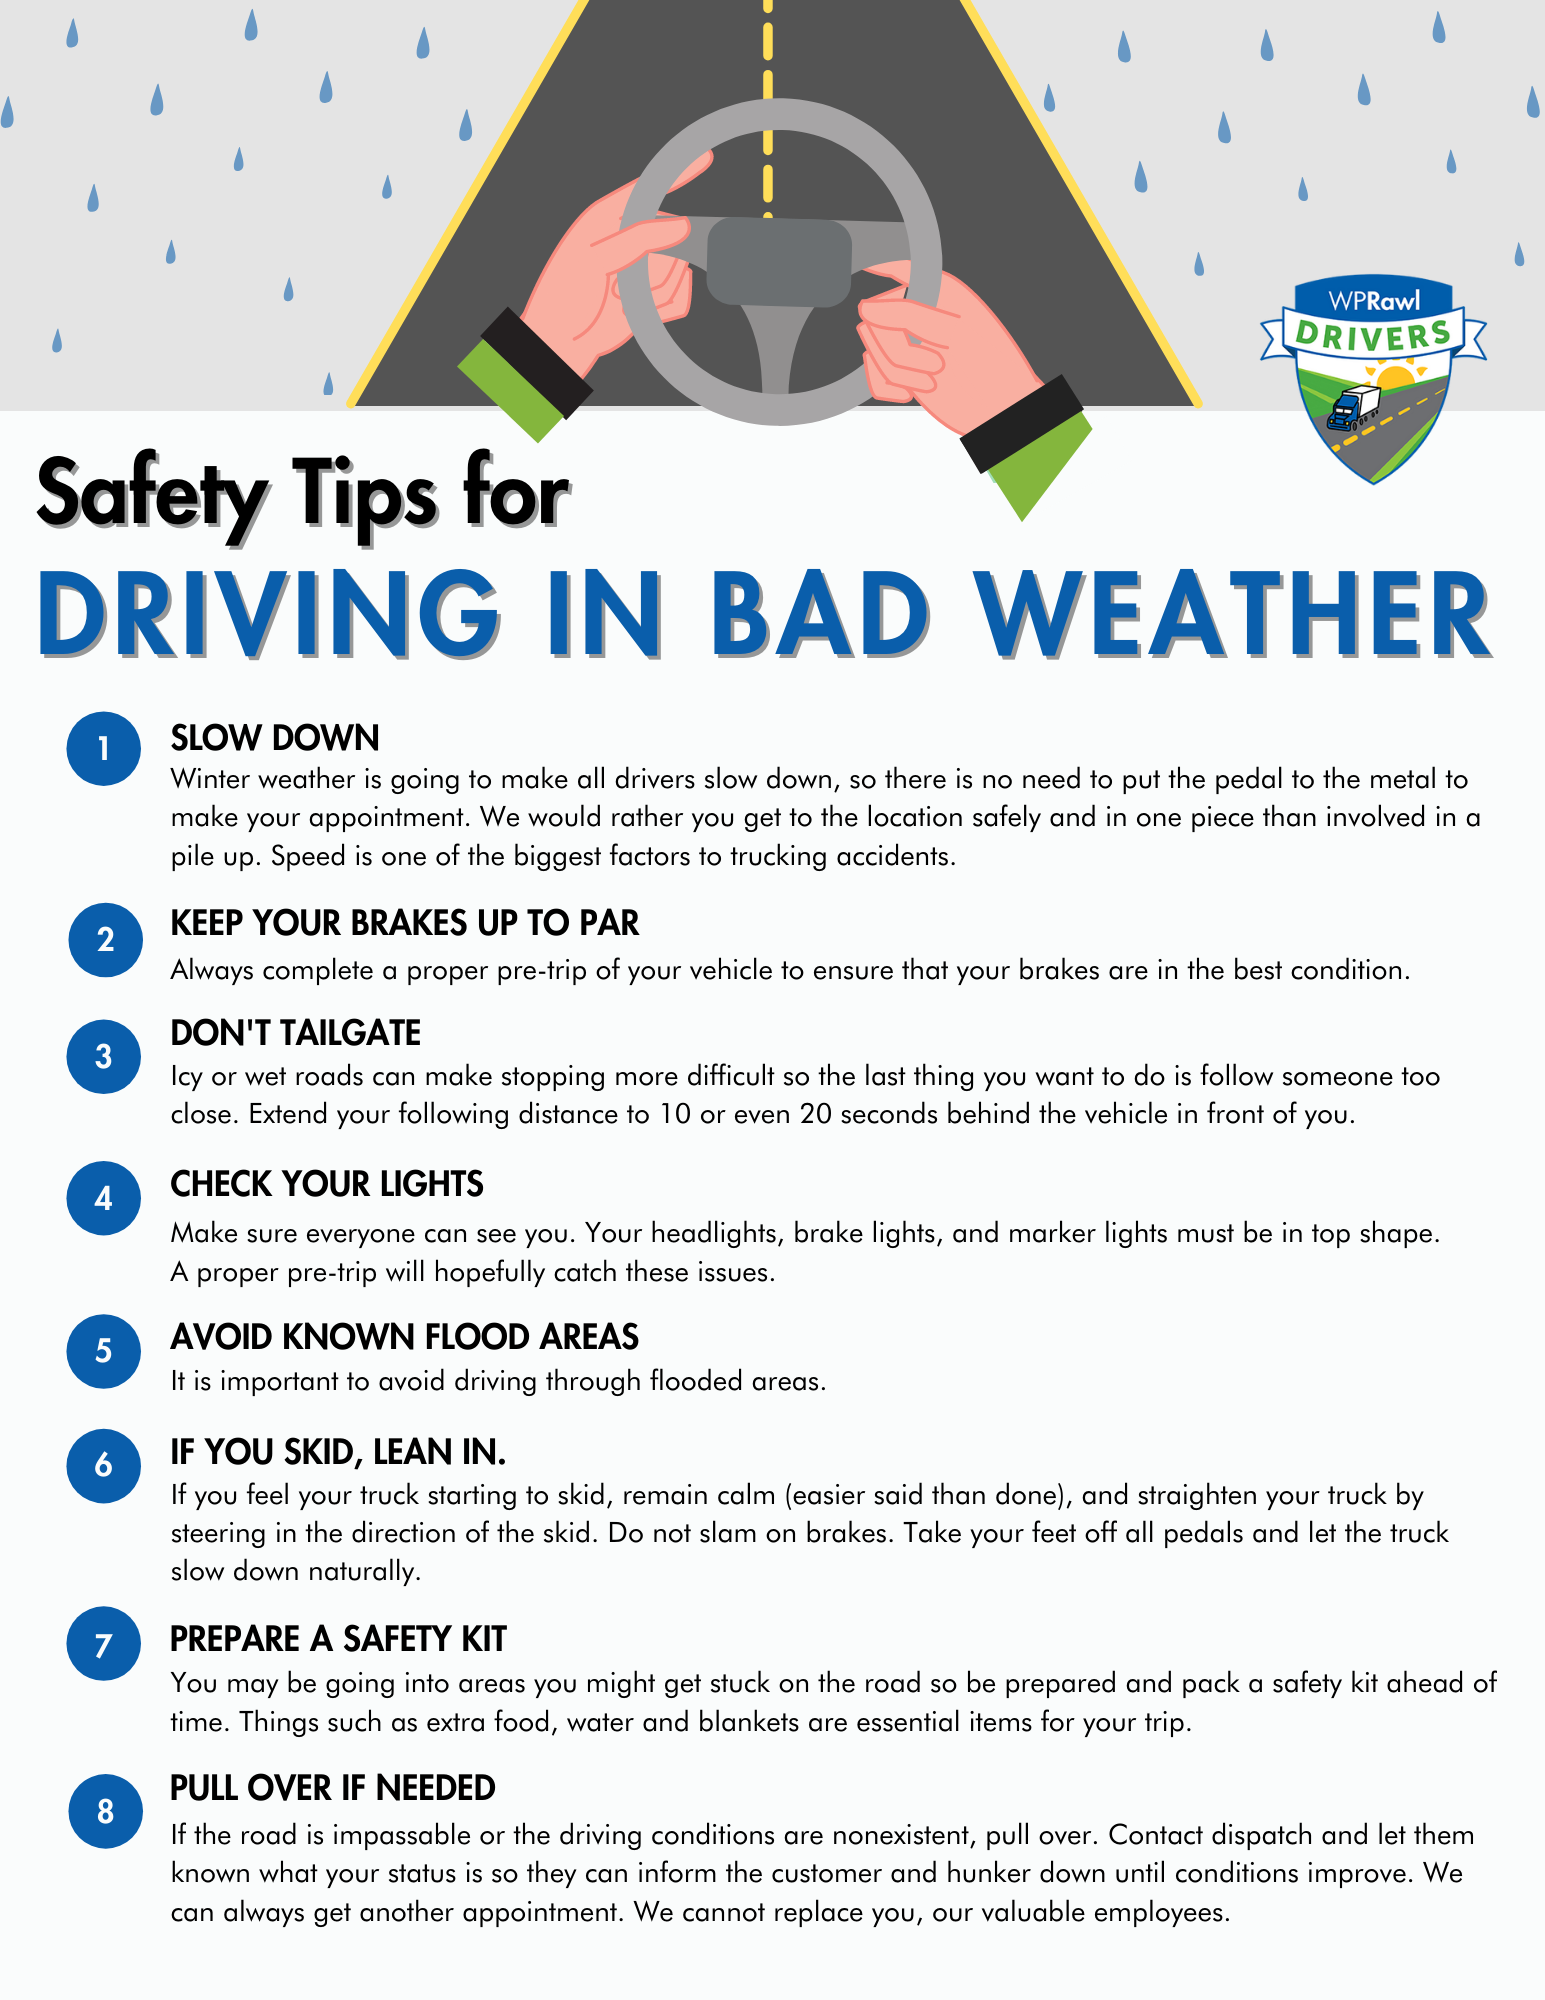 Safety Tips For Driving In Bad Weather